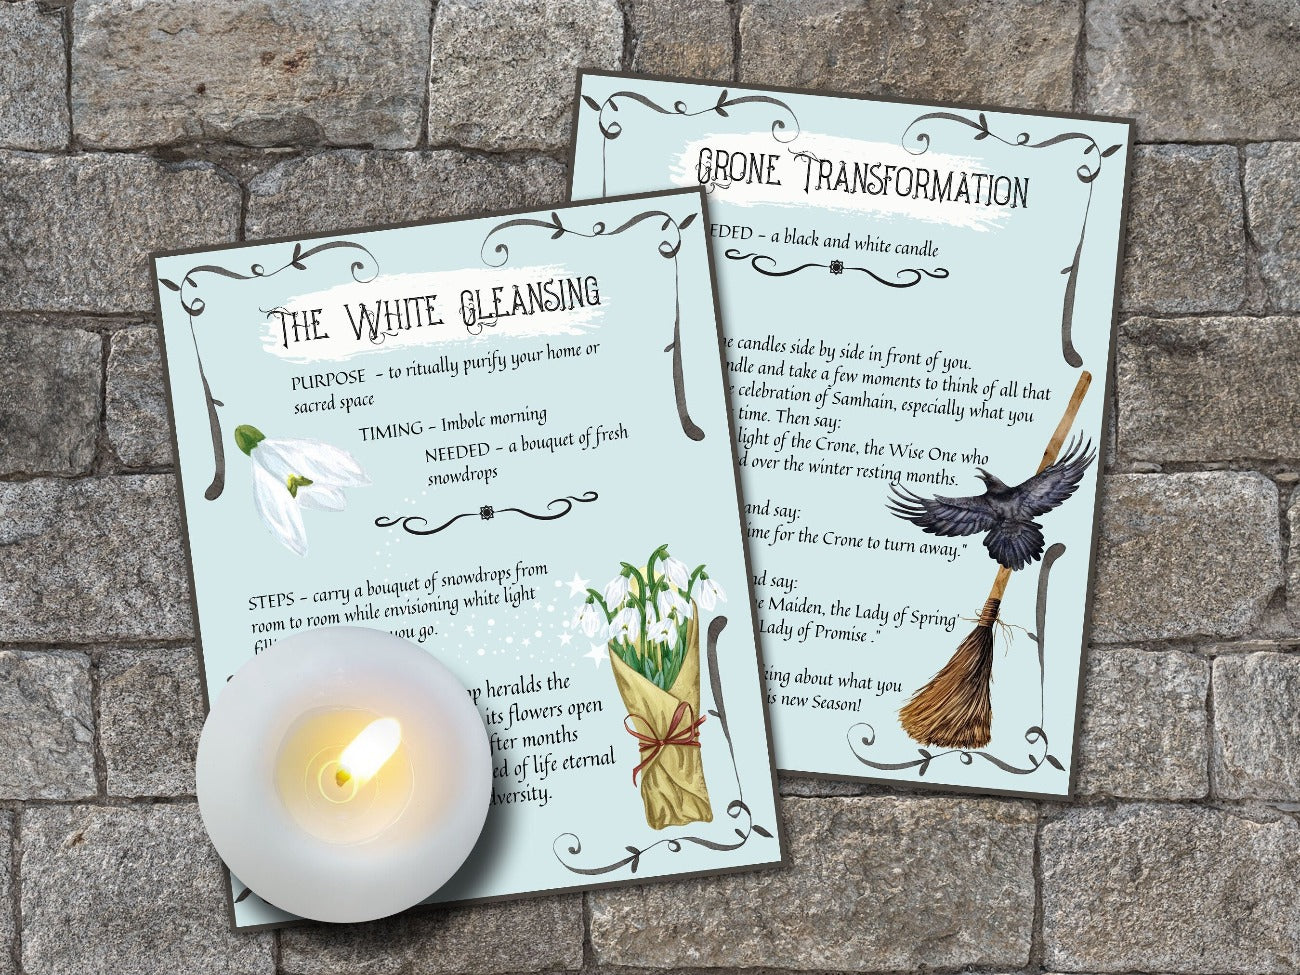 IMBOLC SPELL CARDS, The White Cleansing and Crone Transformation Cards - Morgana Magick Spell